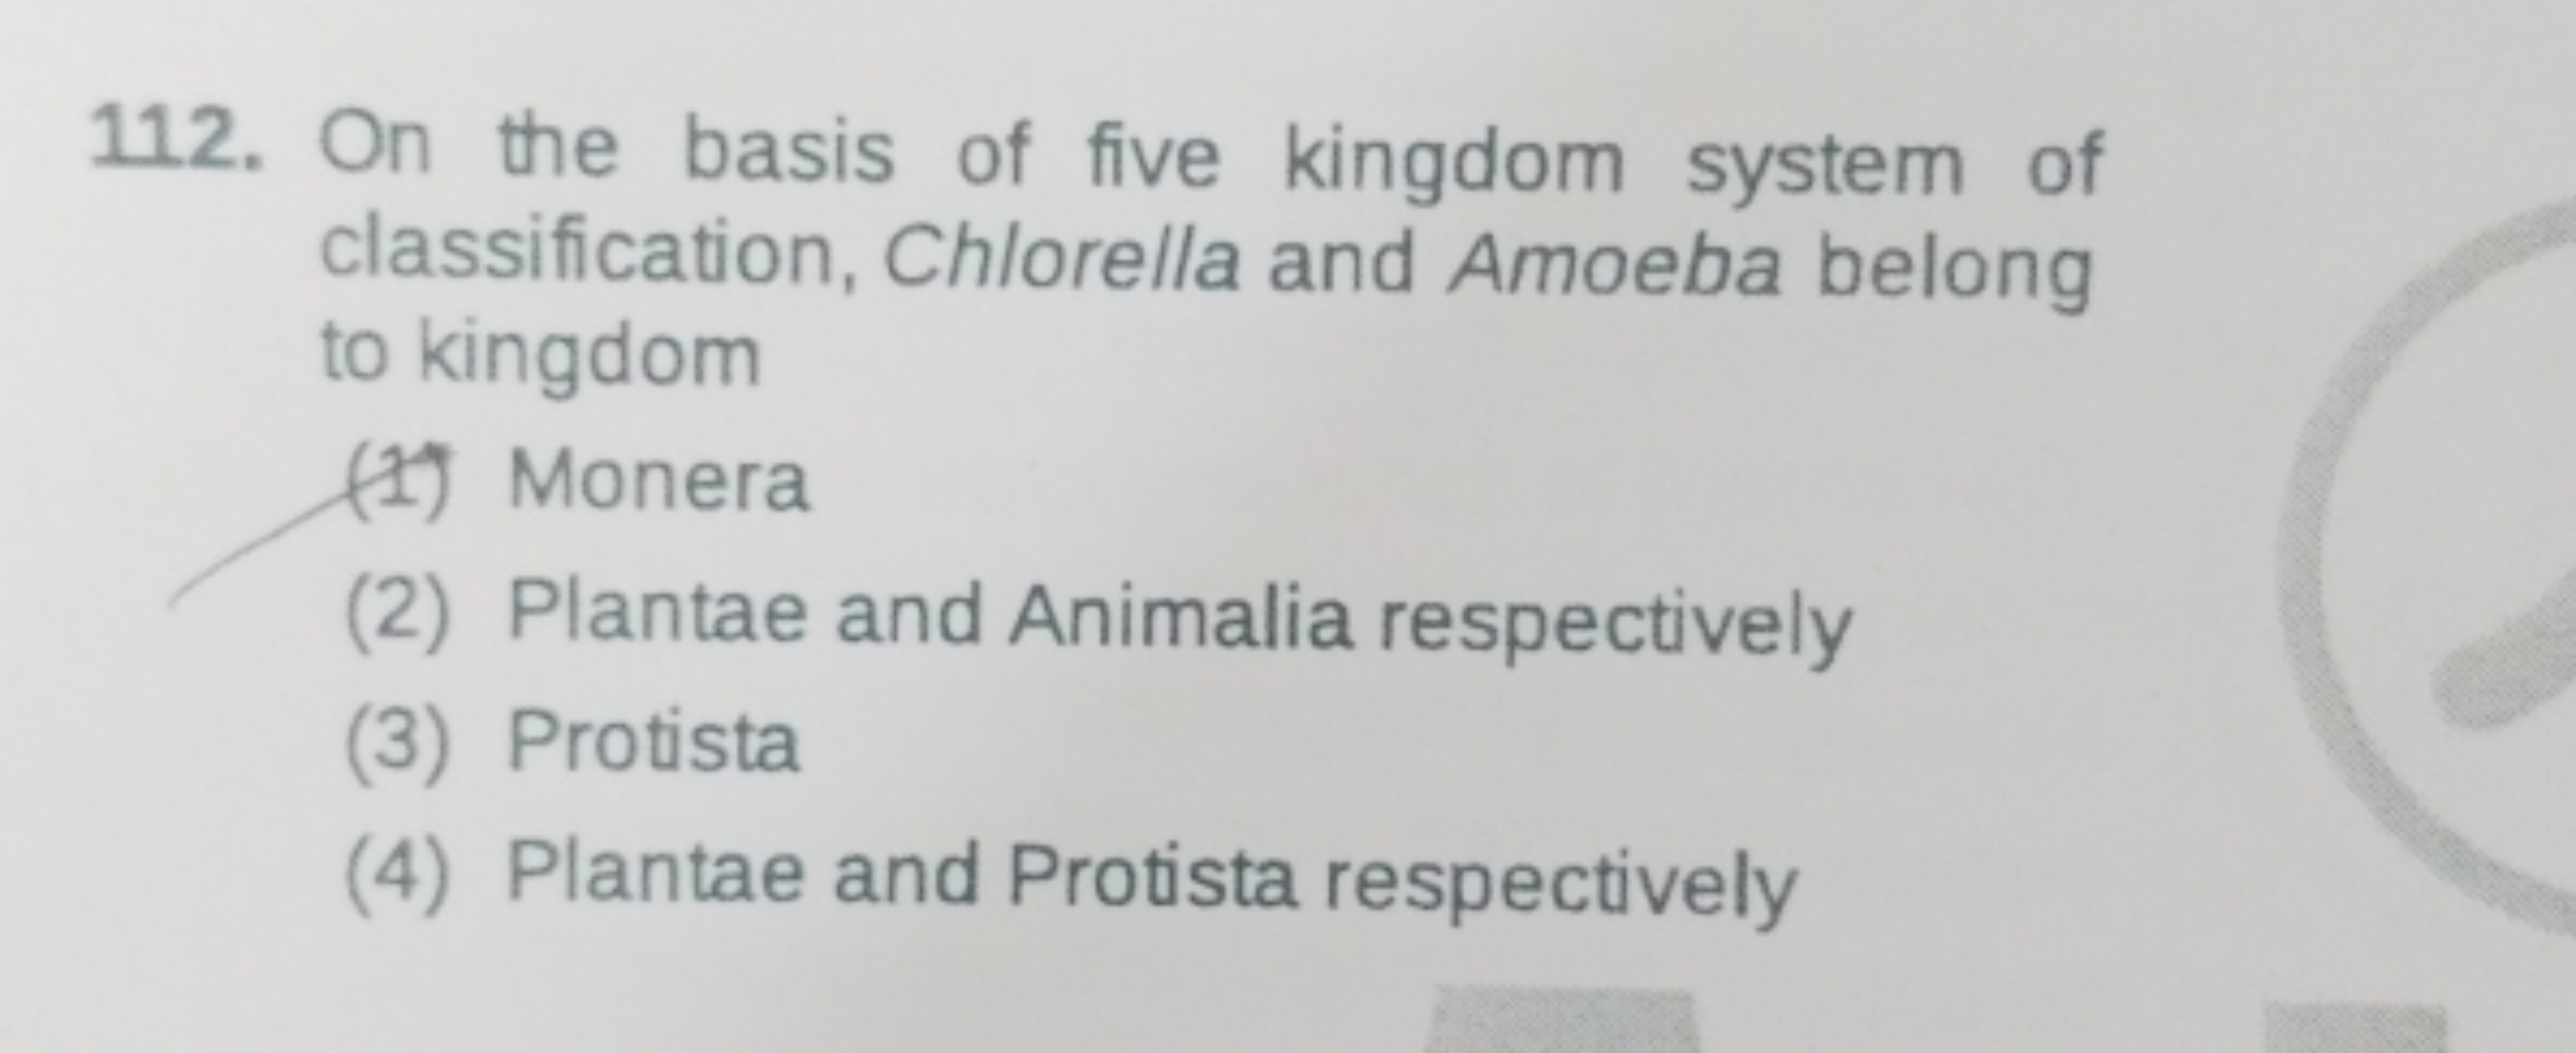 On the basis of five kingdom system of classification, Chlorella and A